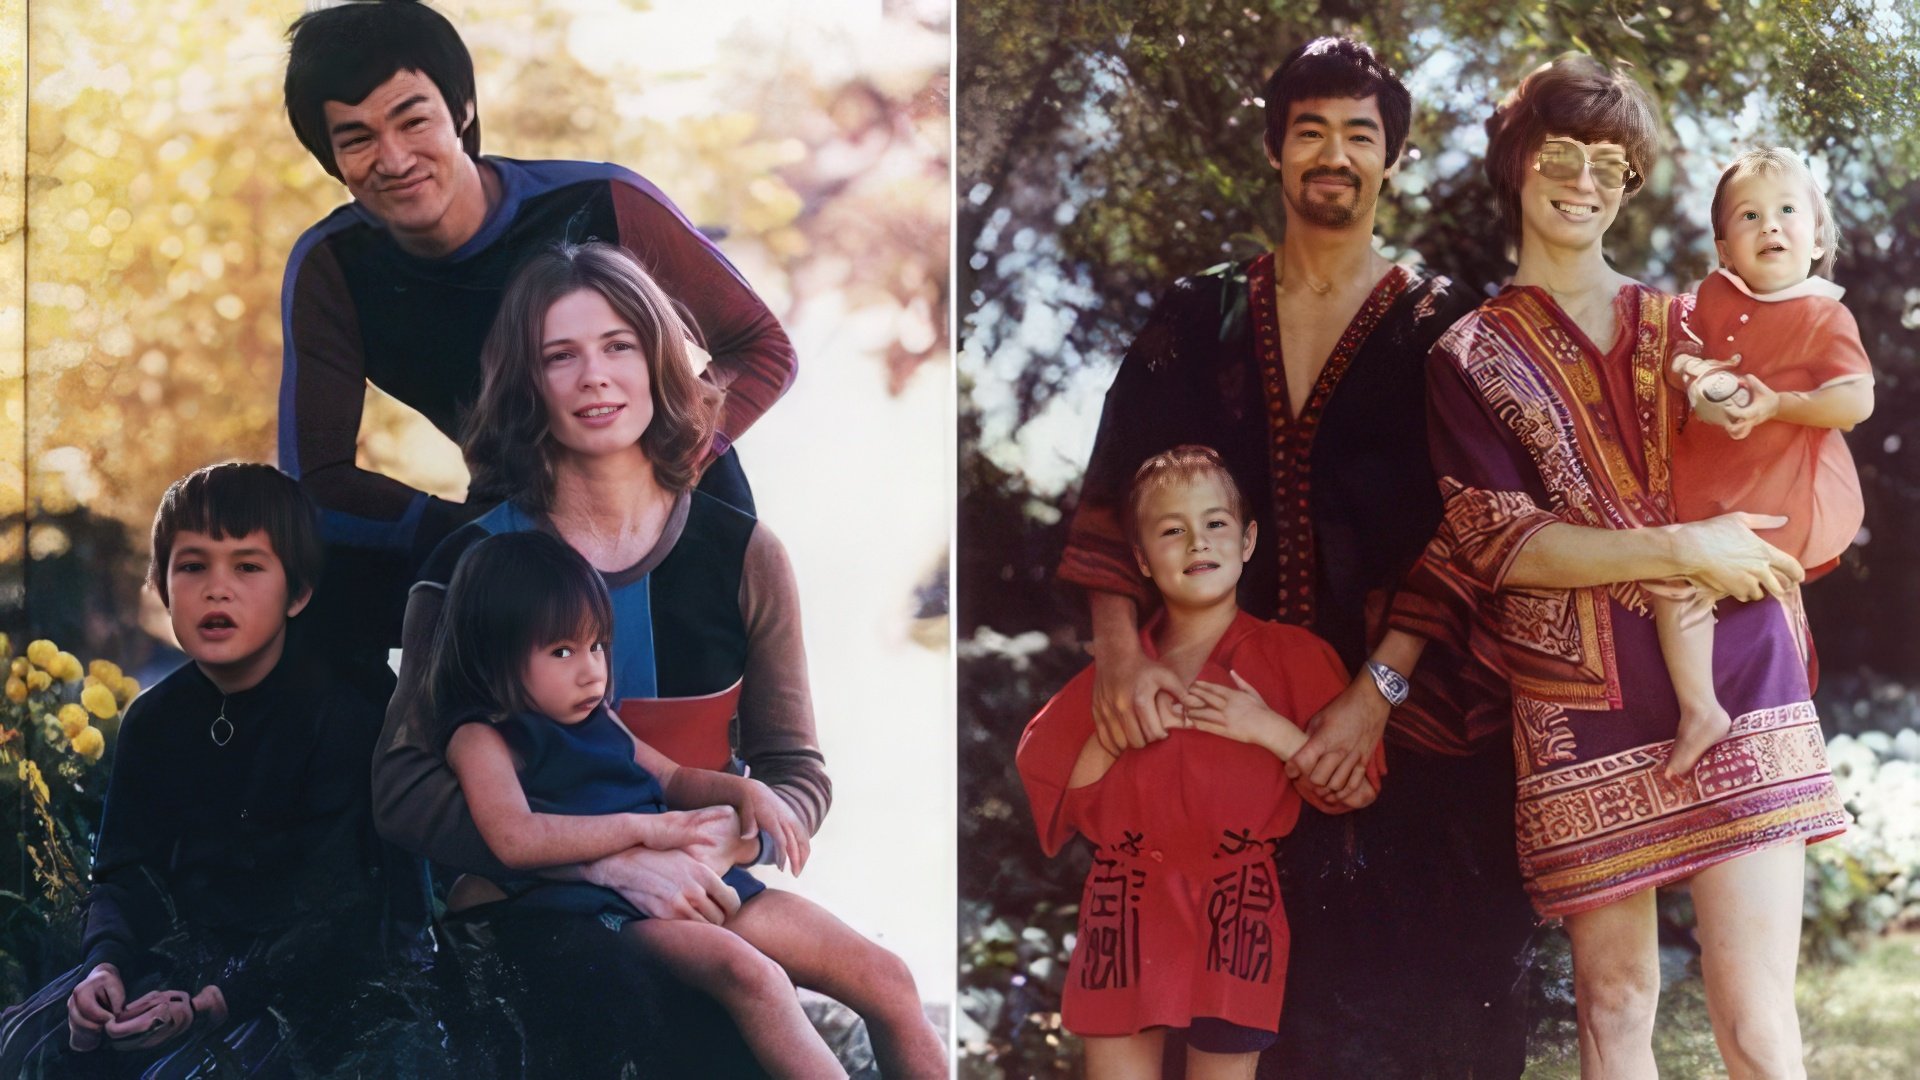 Bruce Lee with his family